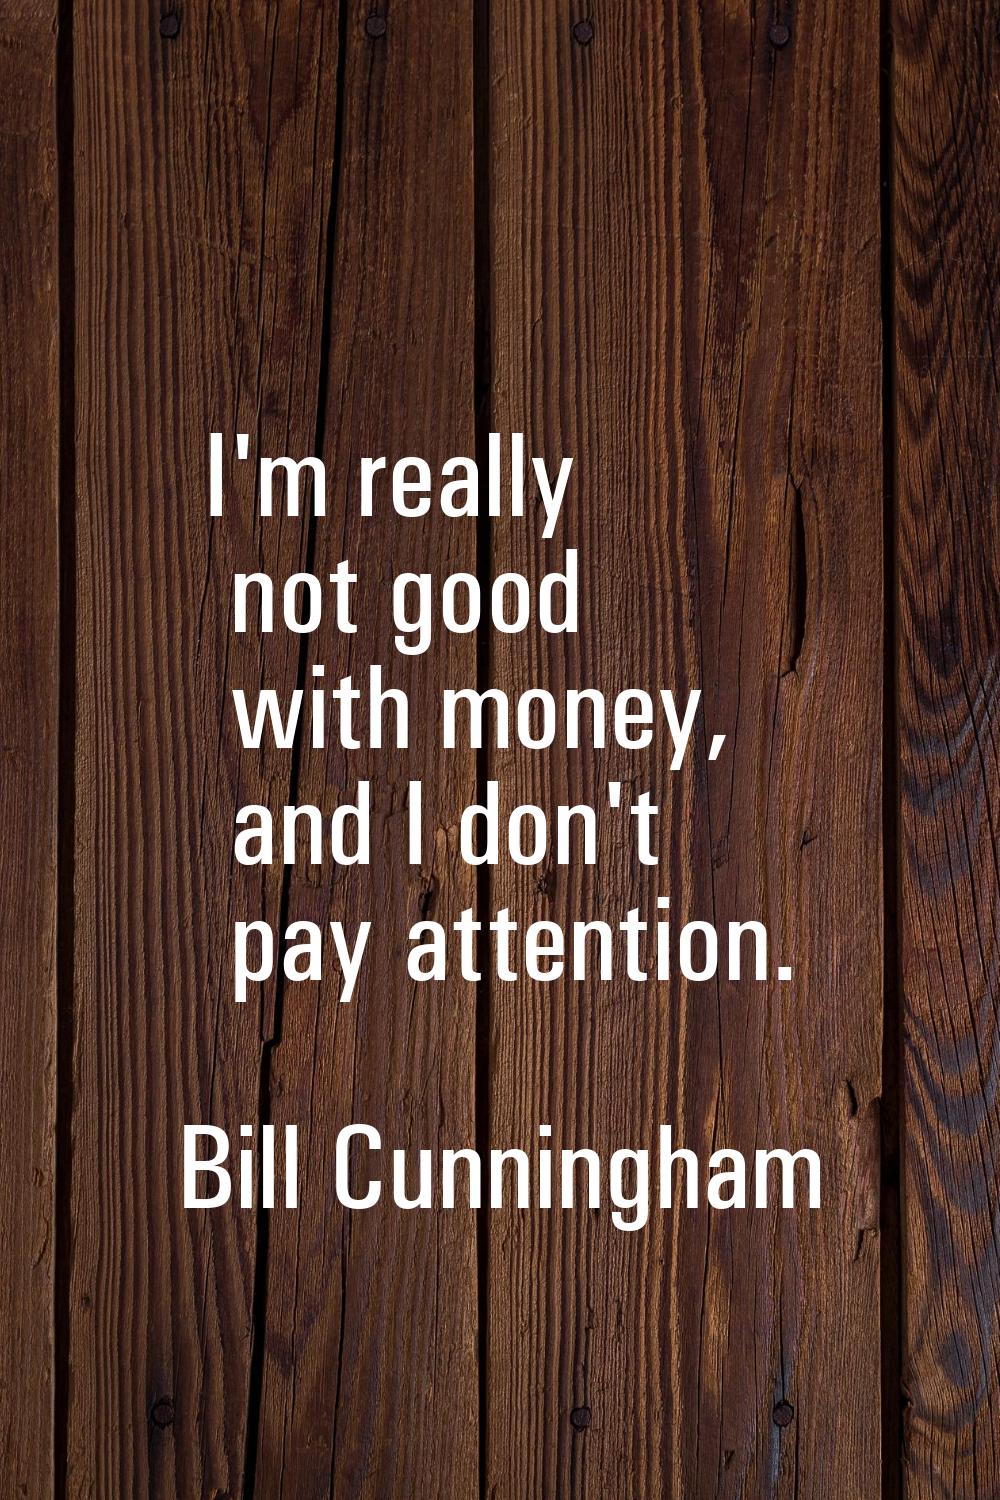 I'm really not good with money, and I don't pay attention.